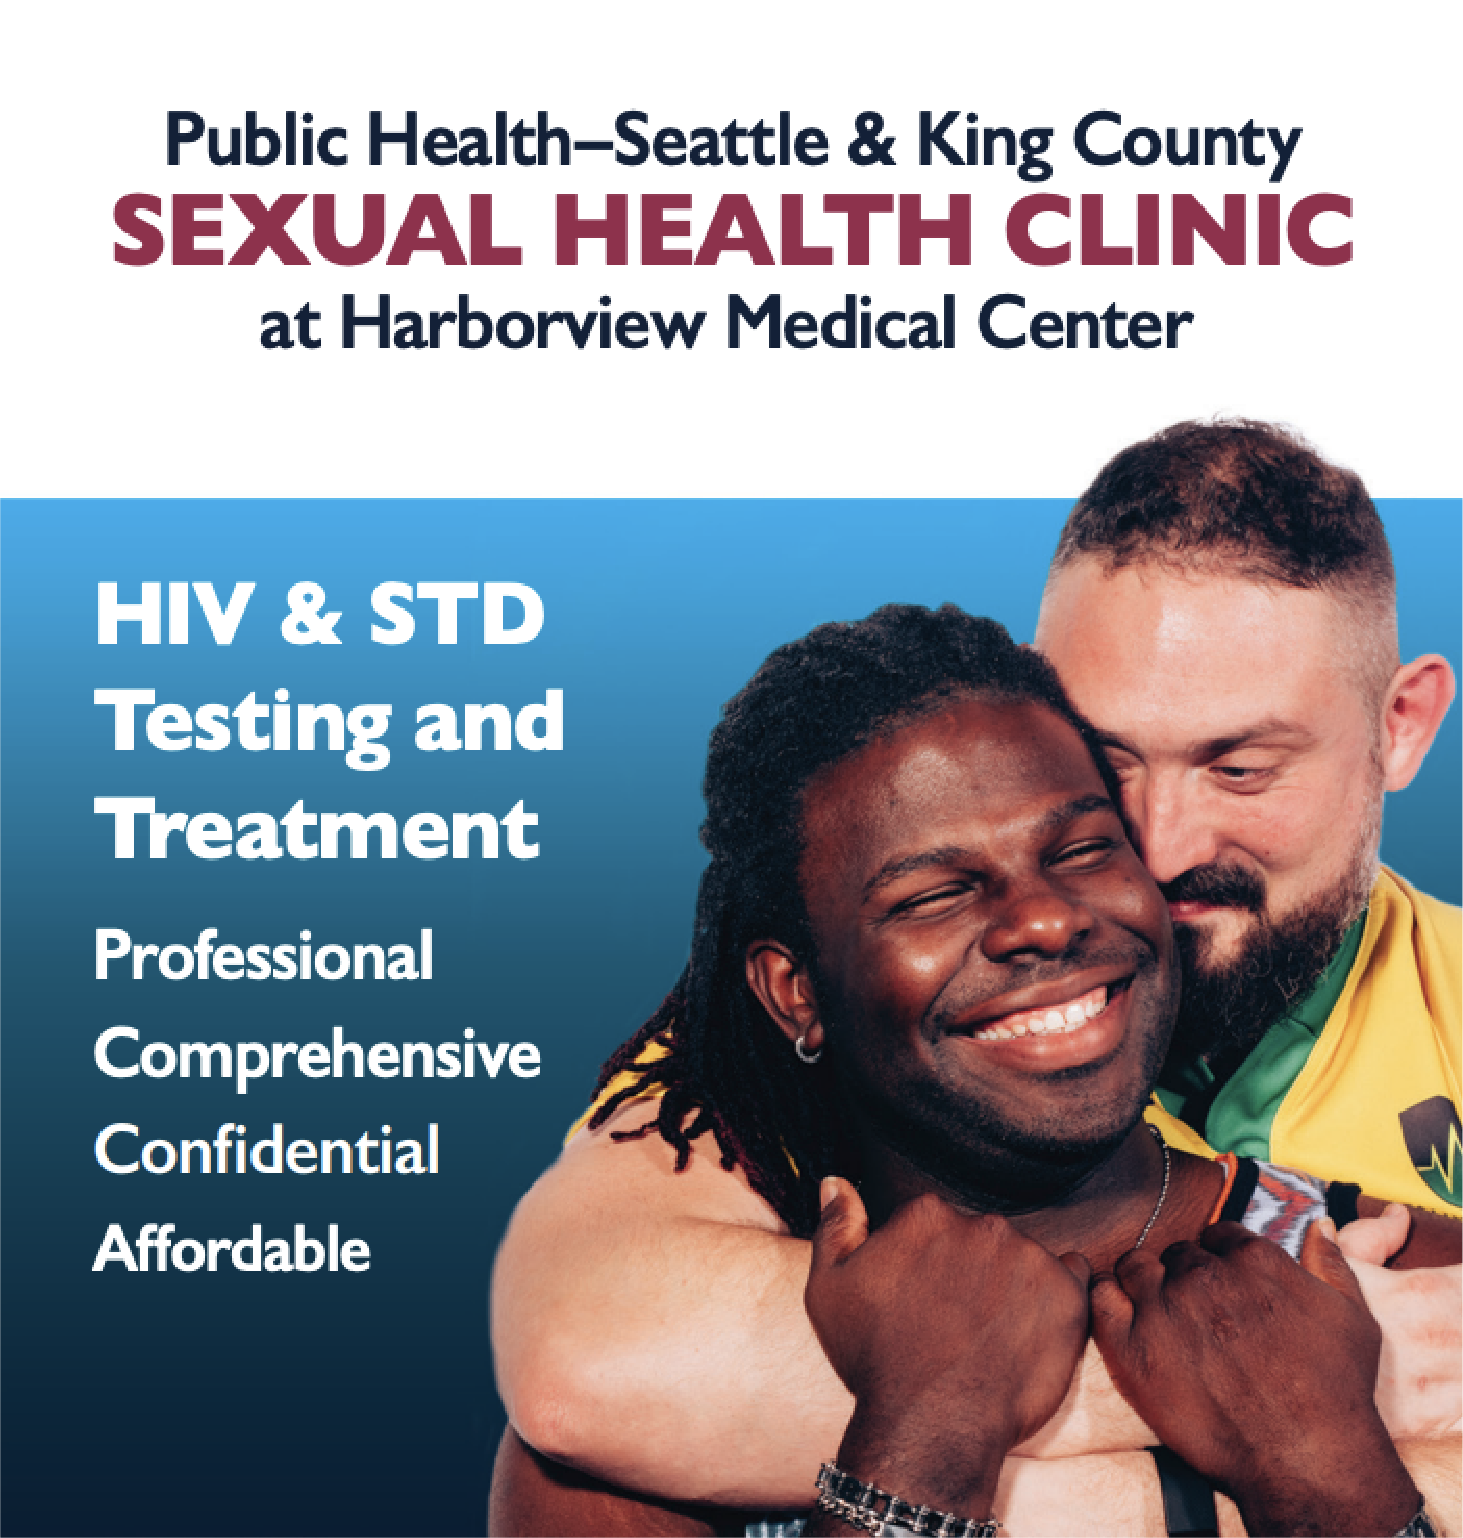 Partial screenshot of the Sexual Health Clinic brochure